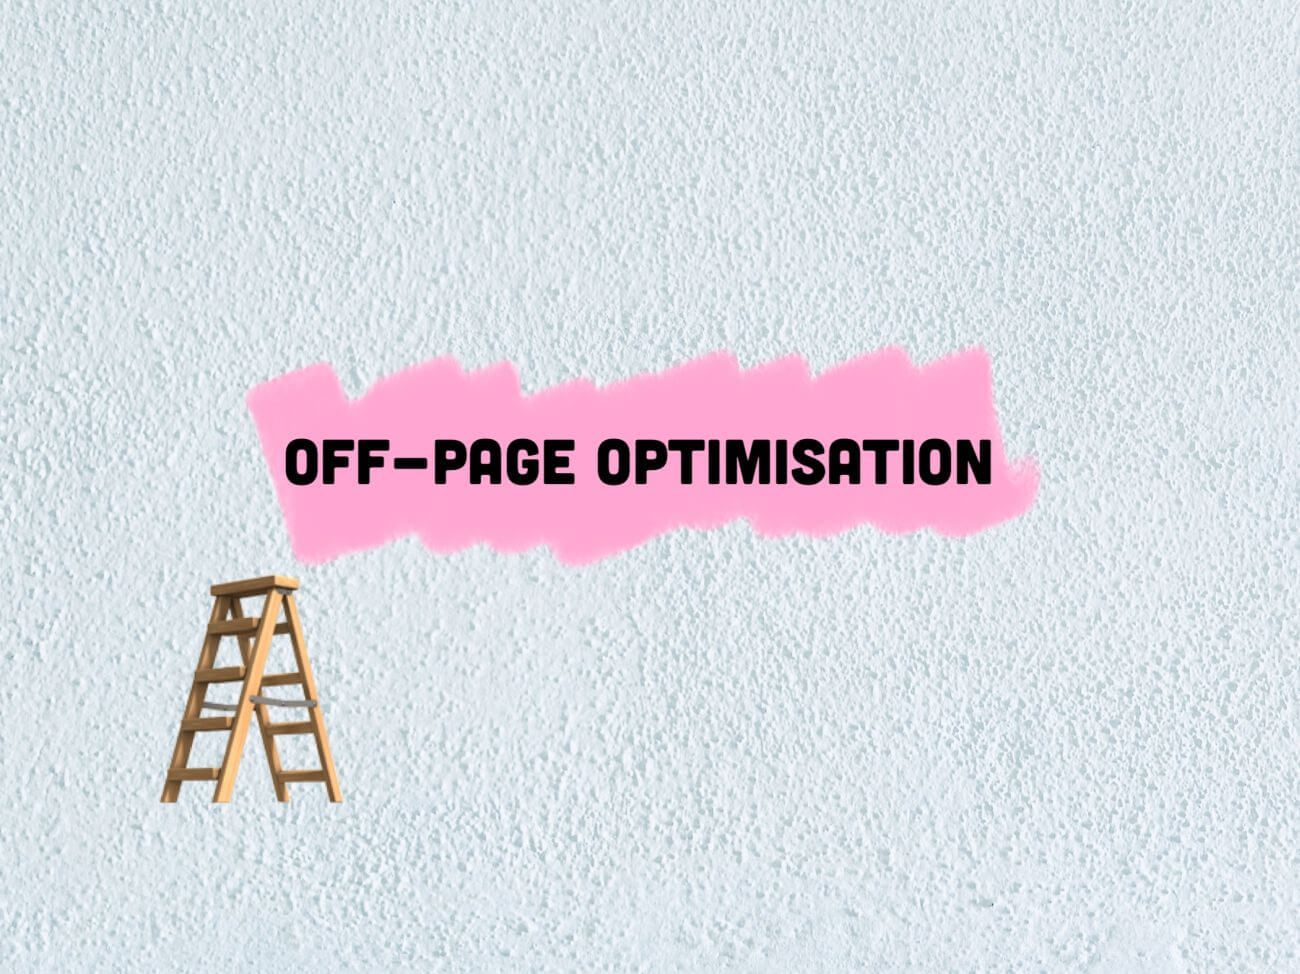 off page seo